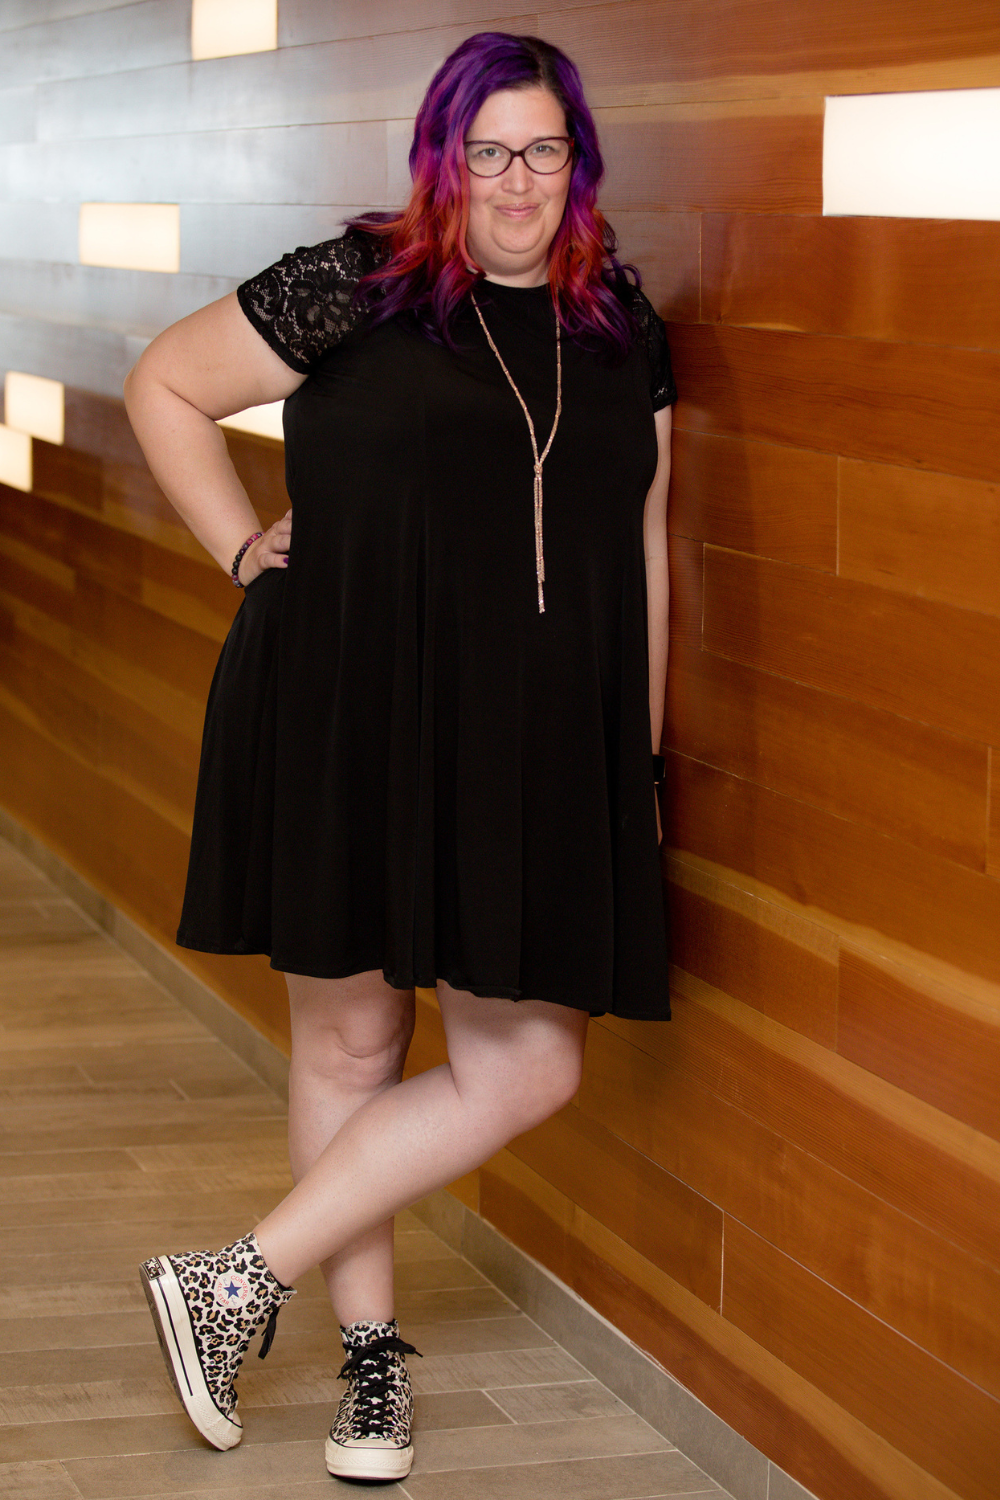 Meg is smiling and leaning against a wall. She's wearing a black dress with lace sleeves, a long gold necklace, and showing off leopard print converse high tops. Her hair reminds me of the Instagram logo in purple, pink, and orange.